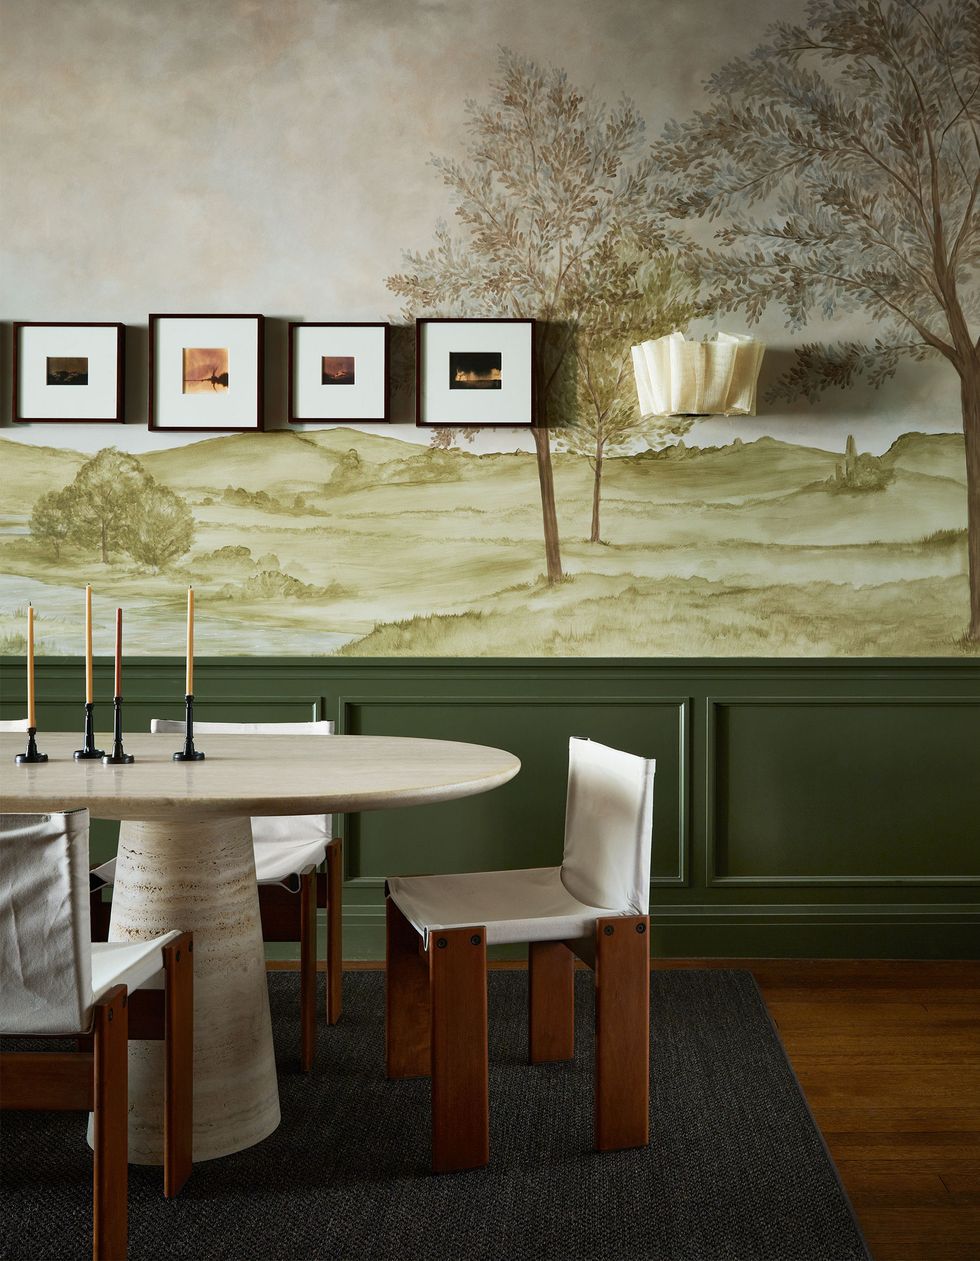 the bottom of a dining room wall is dark olive and the top is a green toned mural of a rural scene, a ruffled wall sconce, small framed artworks, travertine table with pedestal legs, wood chairs with off white fabric seats